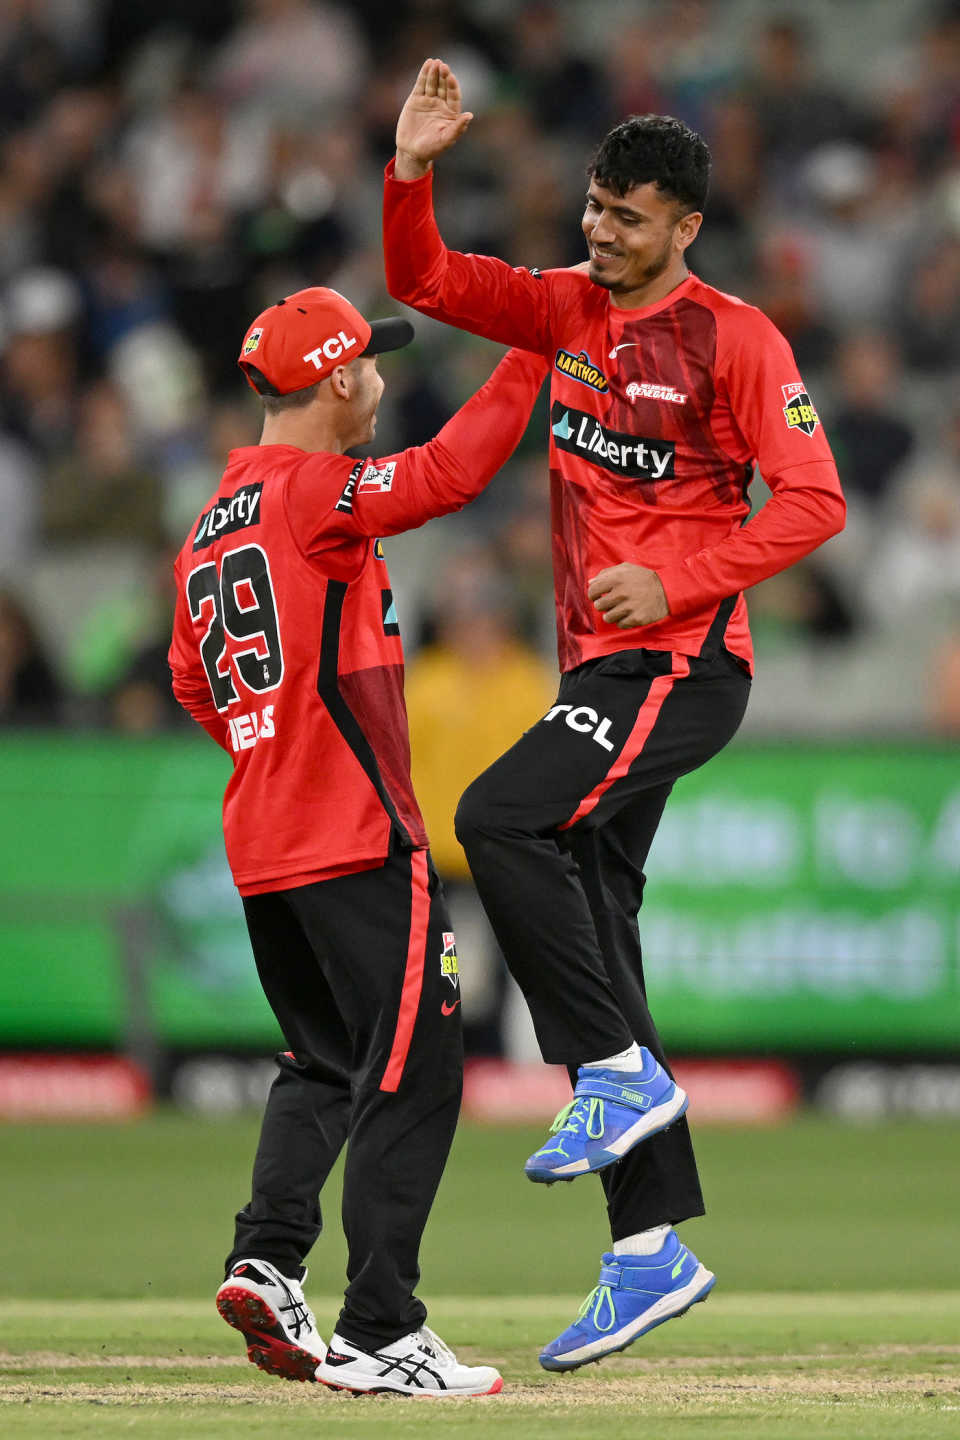 Mujeeb Ur Rahman chipped in with a couple of wickets, Melbourne Stars vs Melbourne Renegades, BBL 2022-23, Melbourne, January 3, 2023